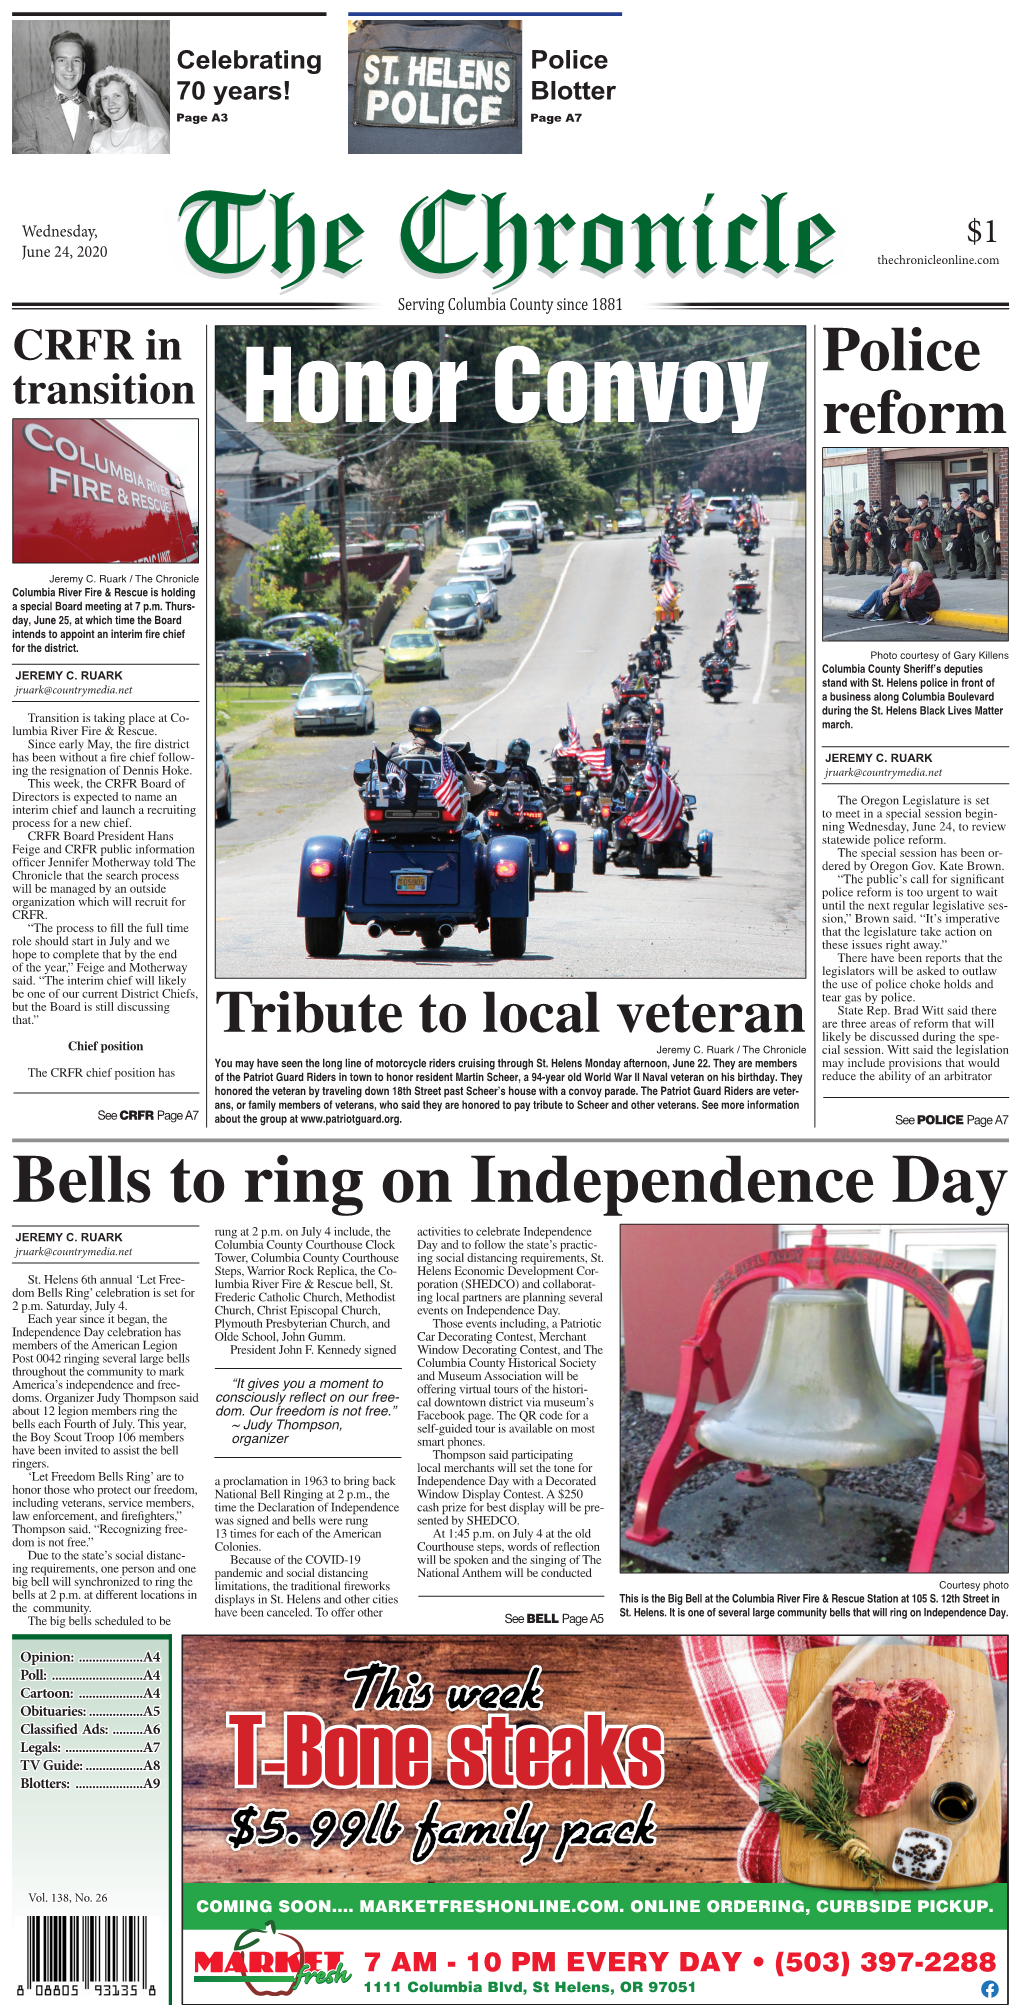 Bells to Ring on Independence Day Rung at 2 P.M